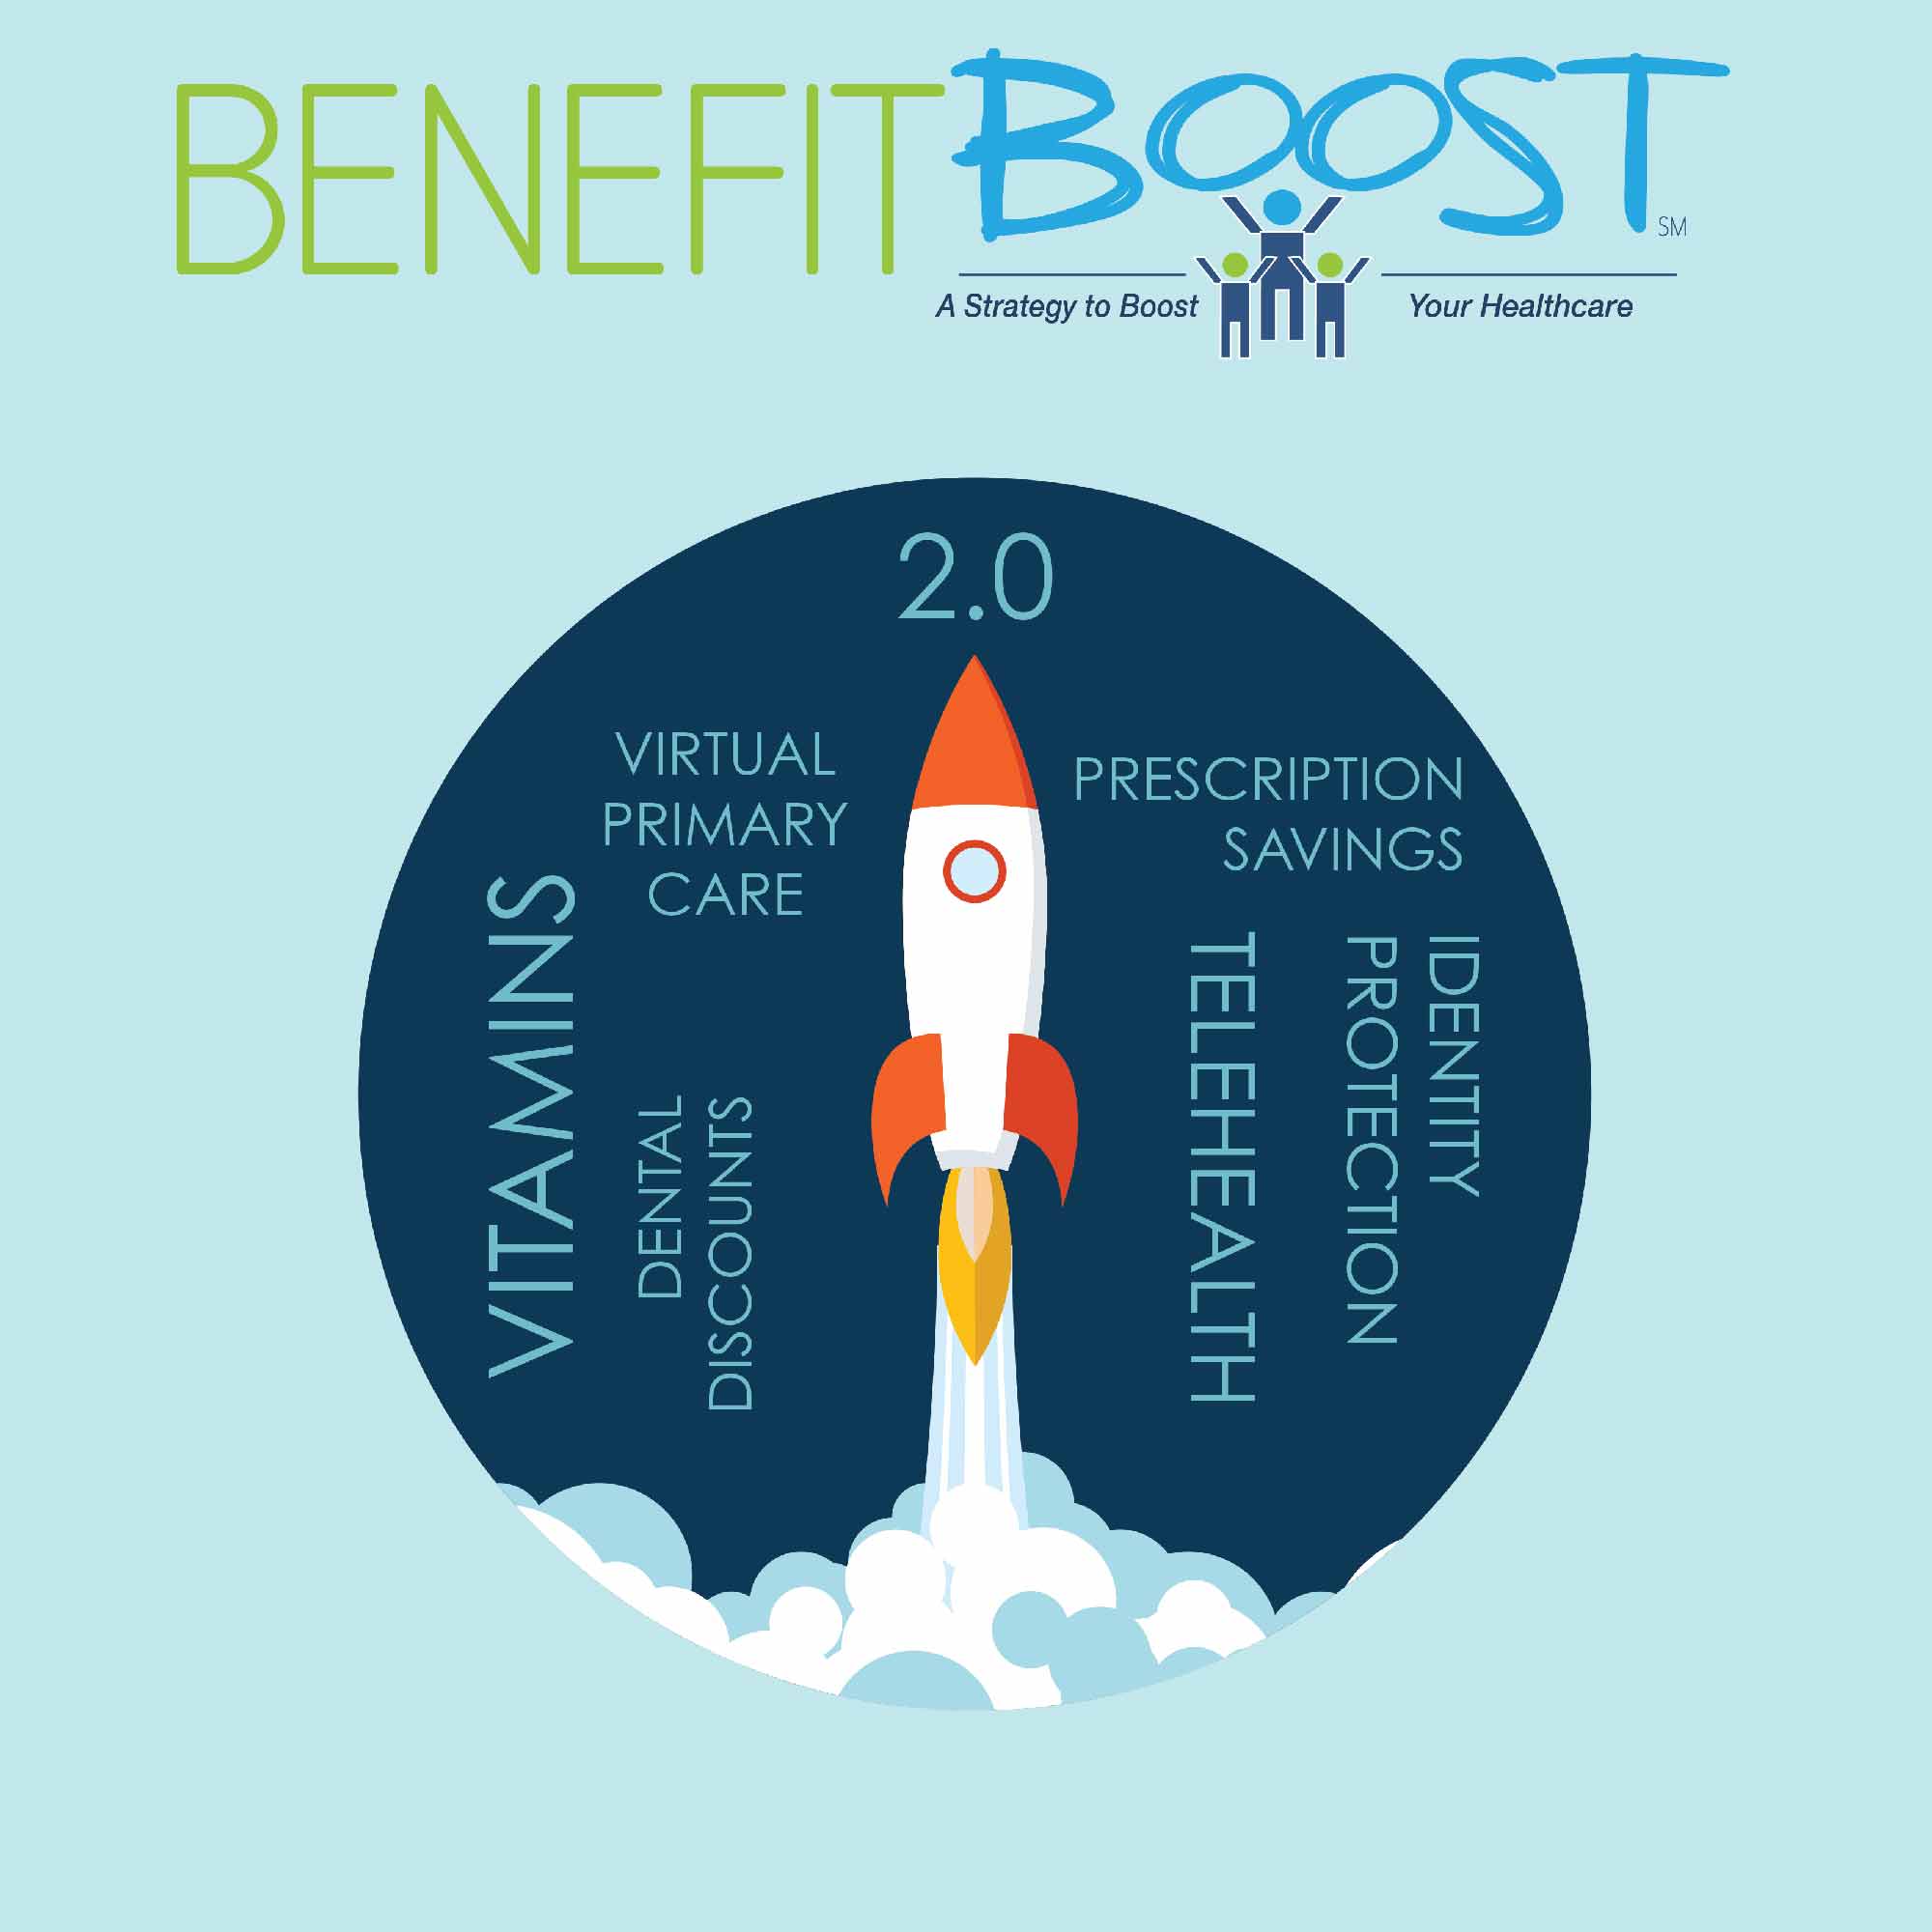 Benefit Boost 2.0, a Benefit Boost Subscription Product